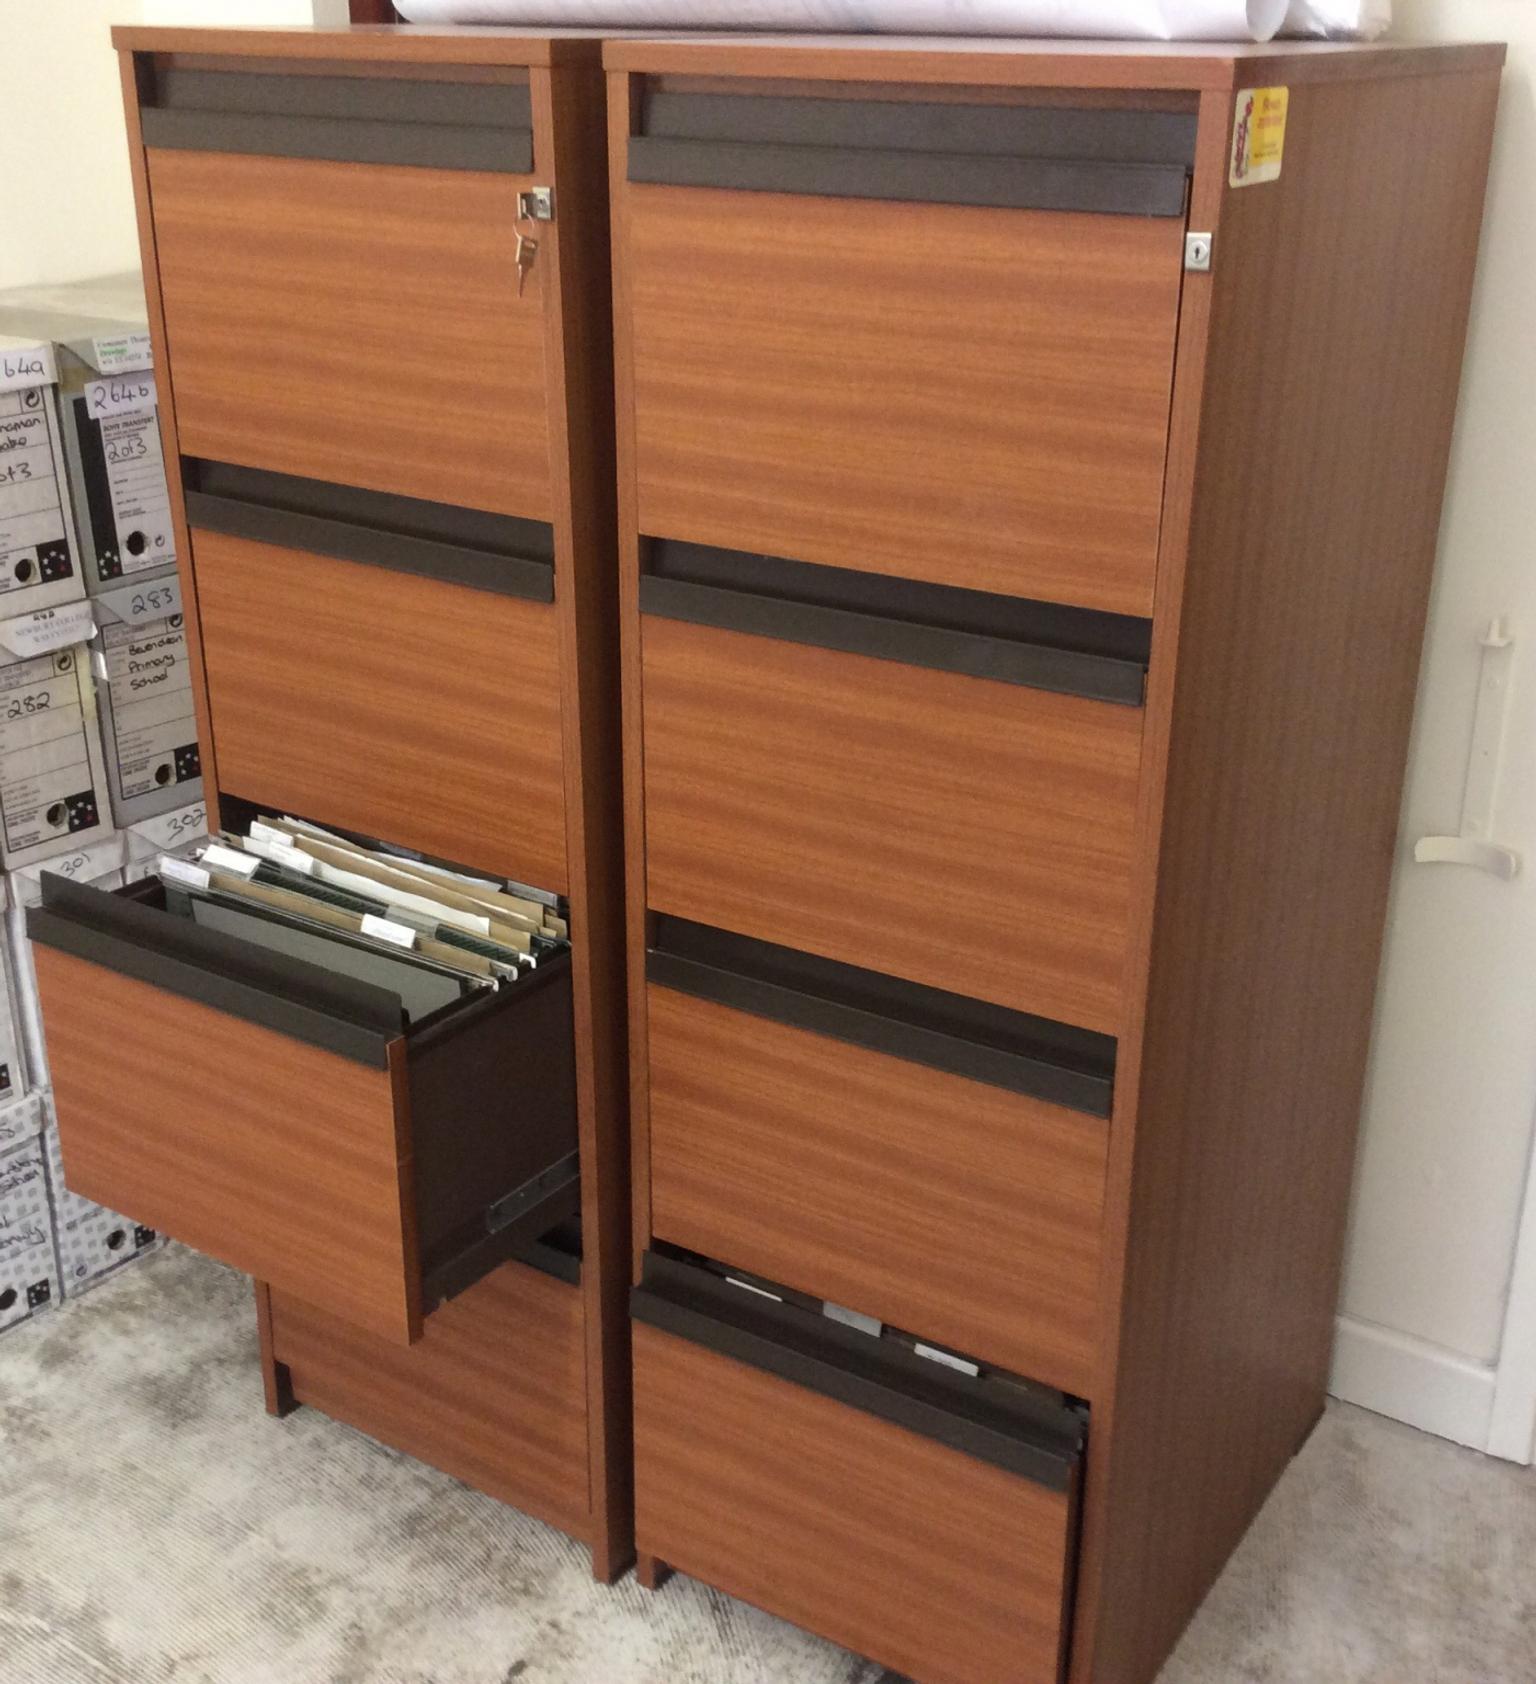 Filing Cabinets 4 Drawer Timber Mahogany Oak In Wigan For 50 00